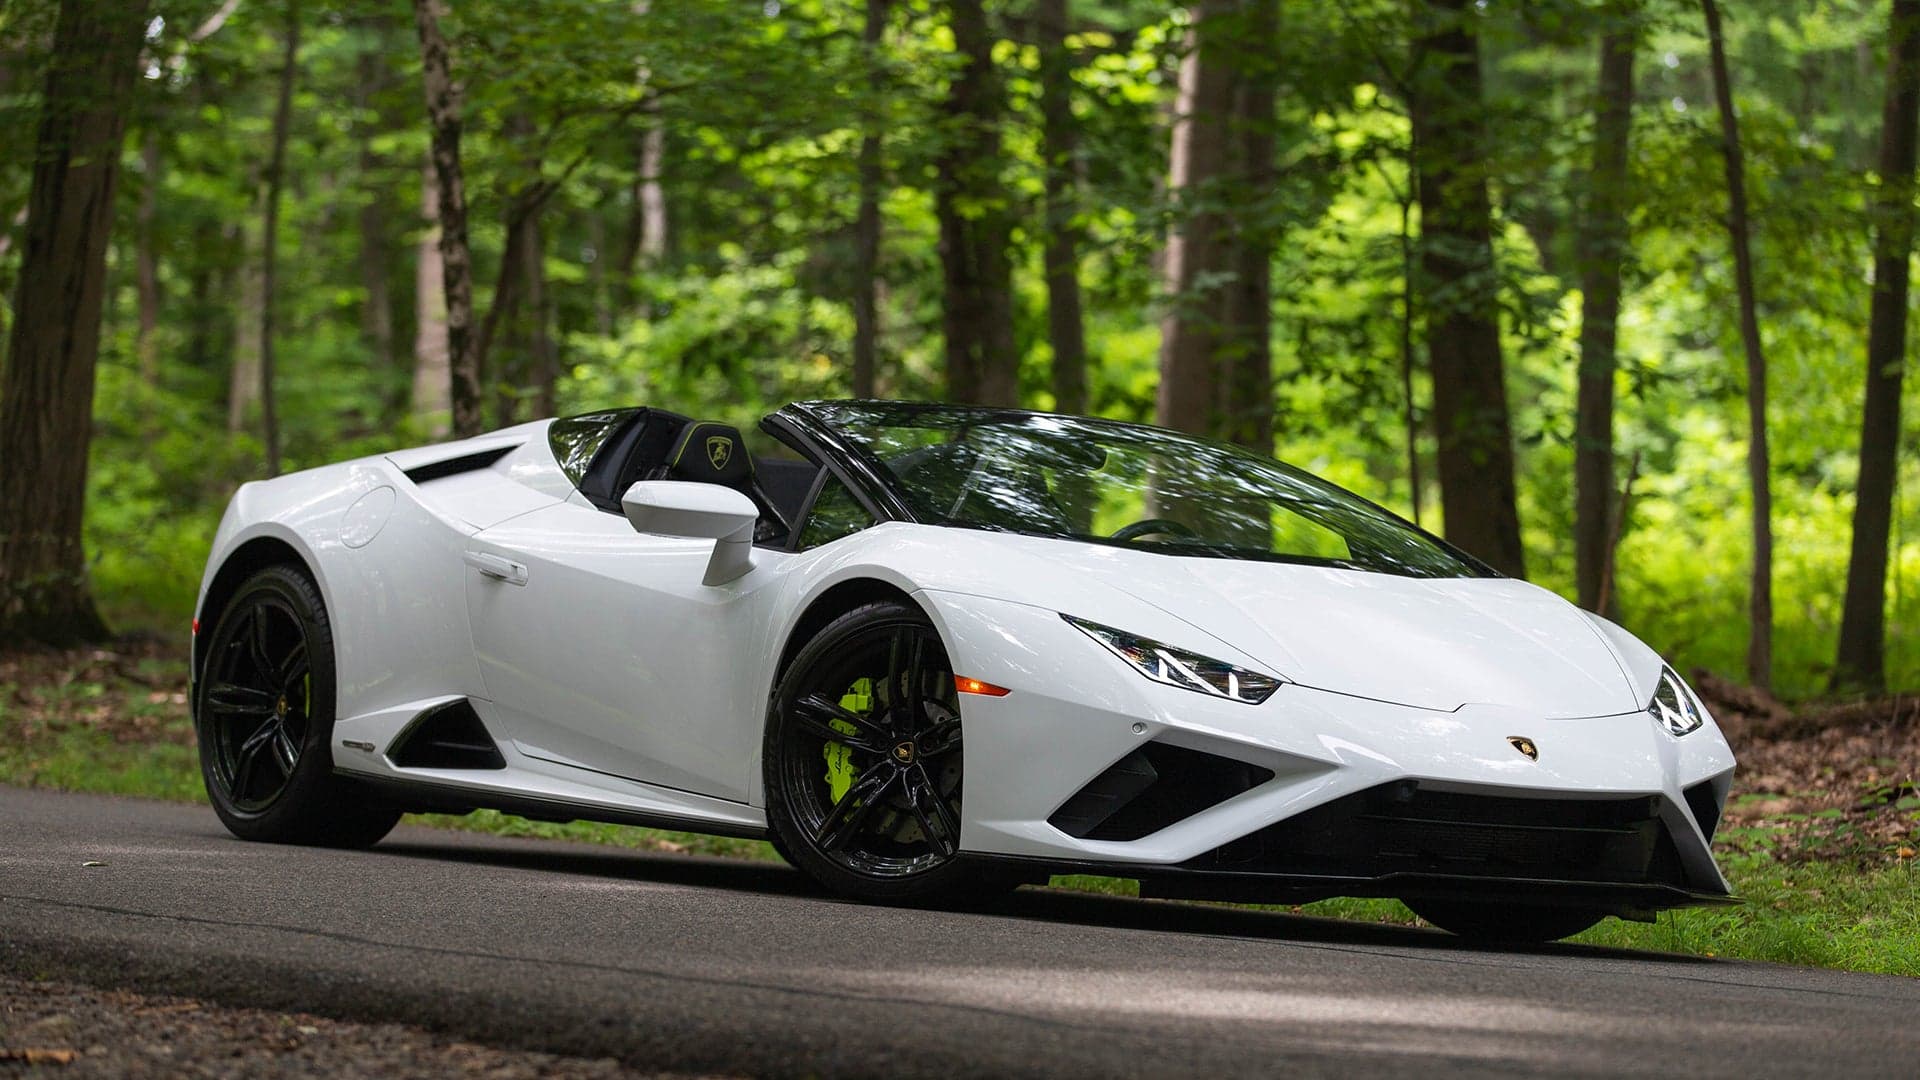 2020 Lamborghini Huracan Evo RWD Spyder Review: The Worst Great Car in the Best Way